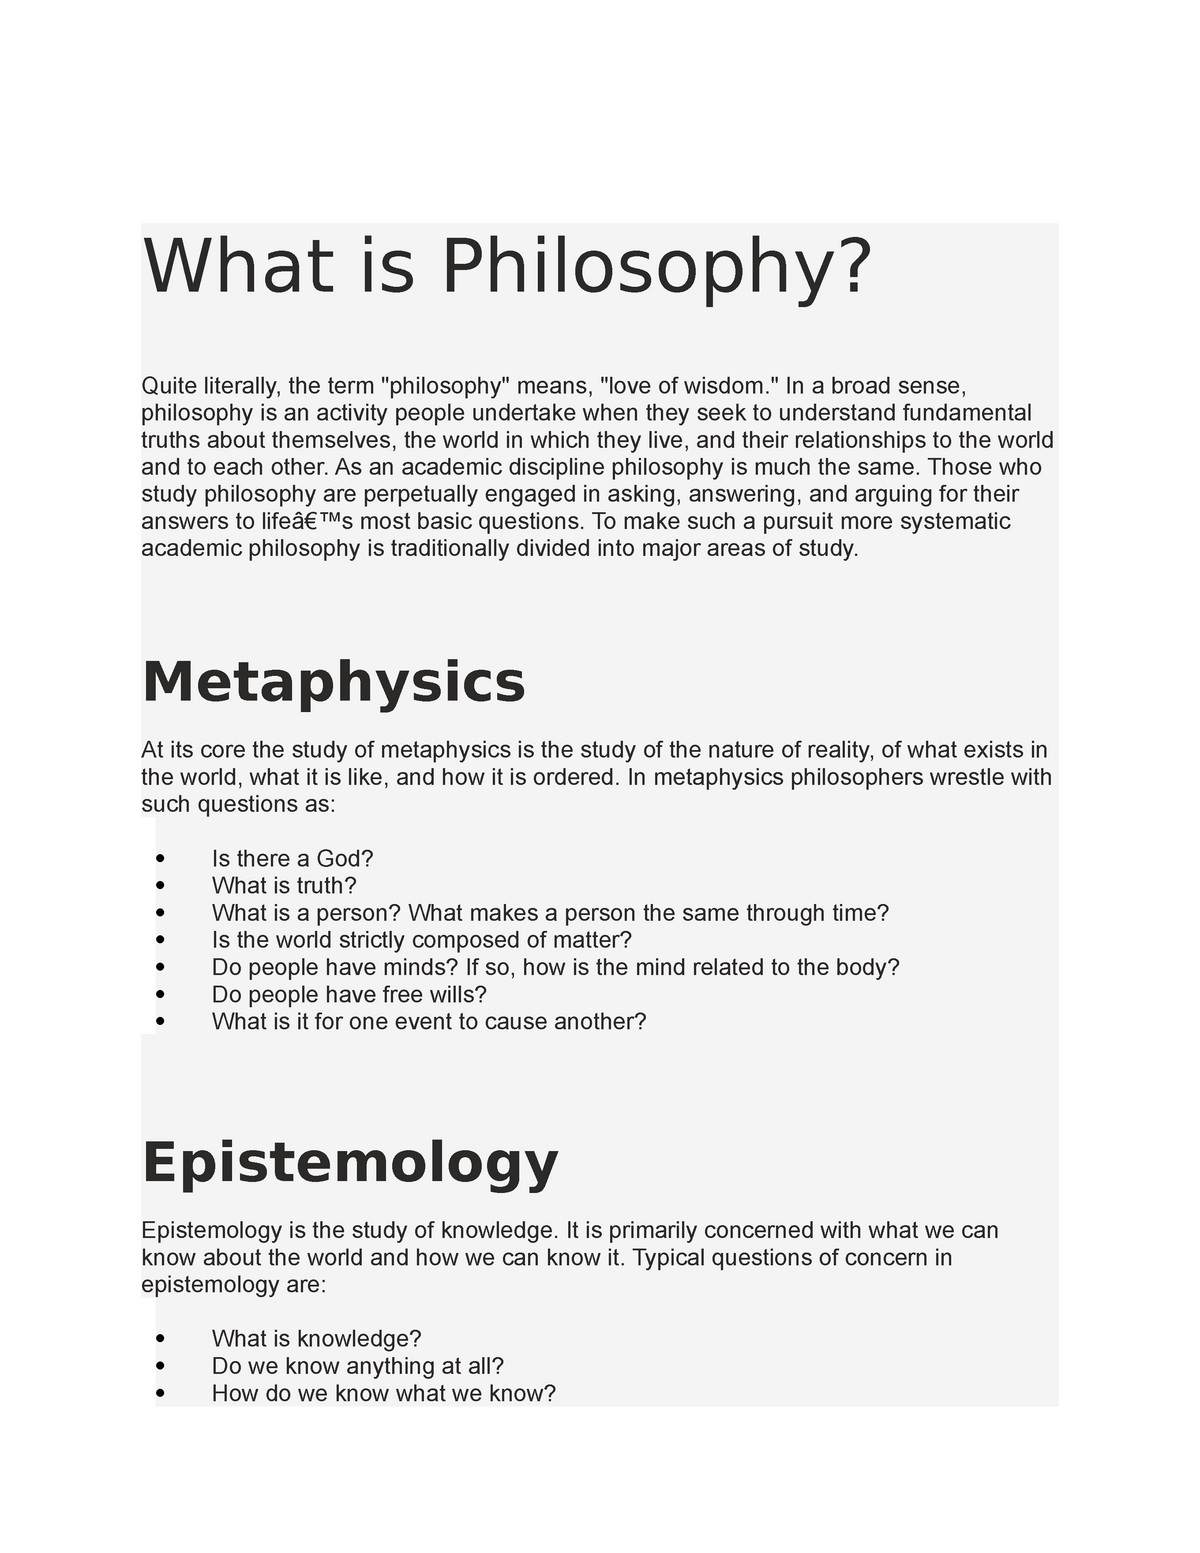 What Is Philosophy for?